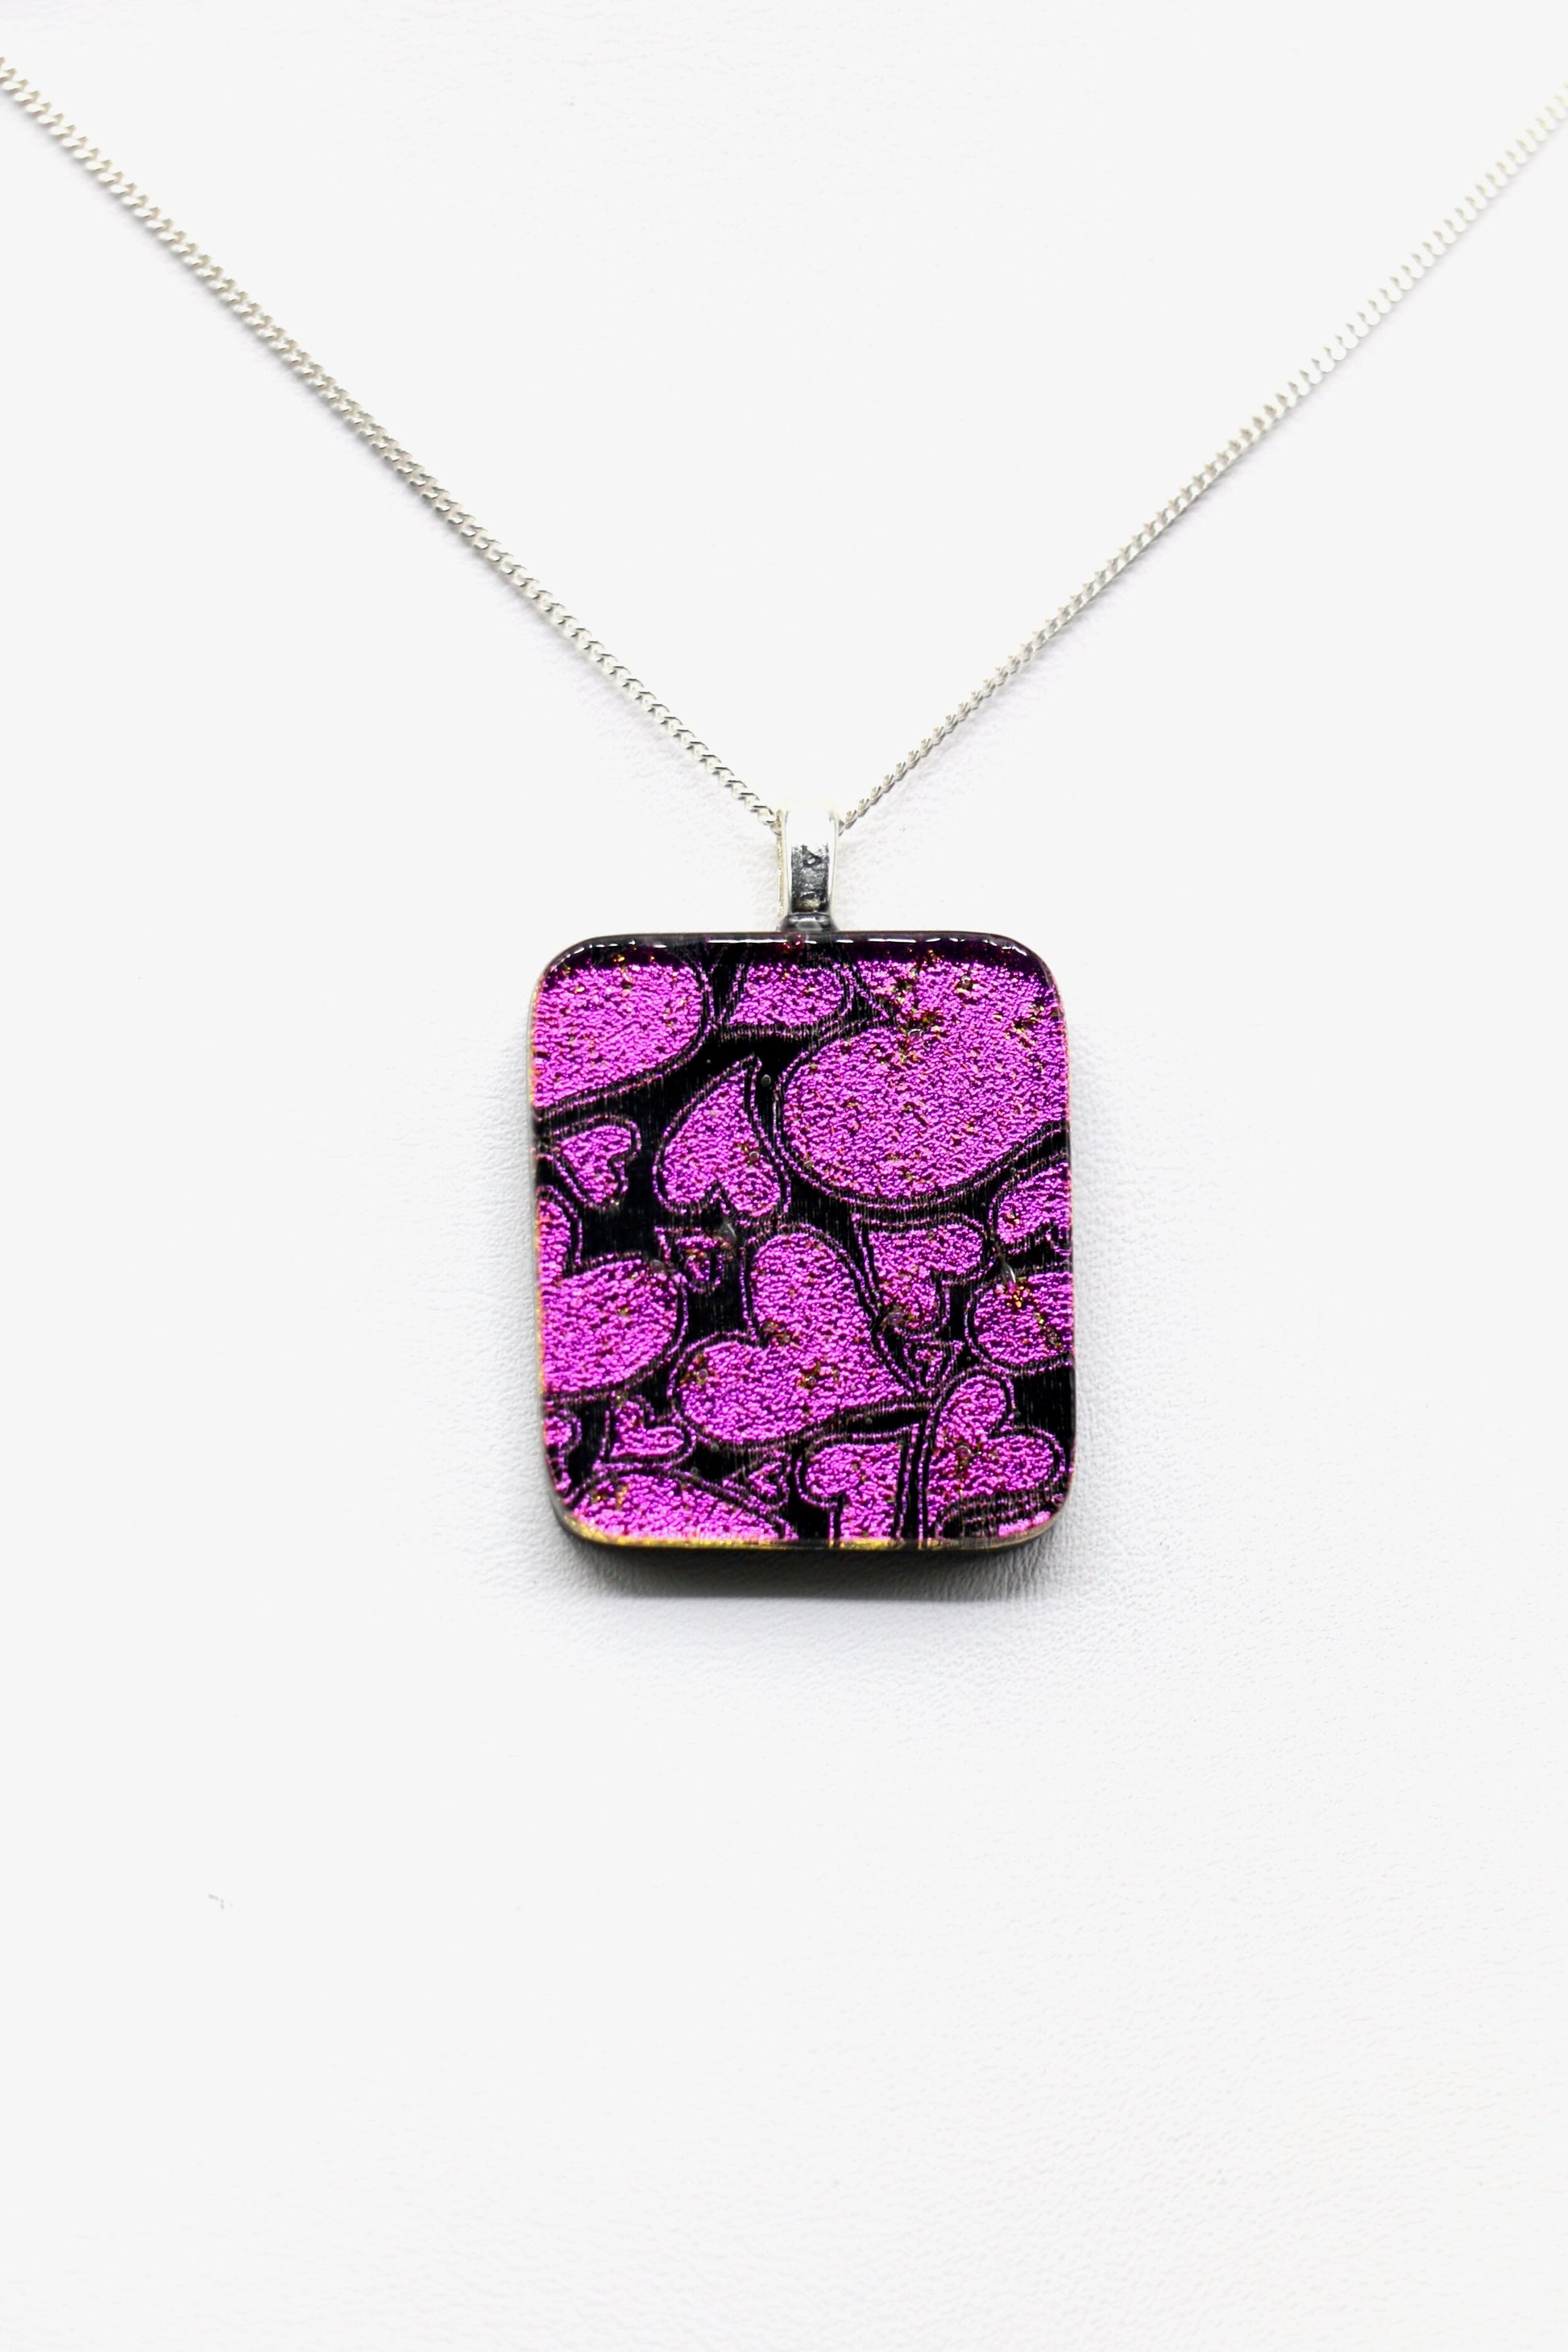 Fused Glass Necklace - 2723